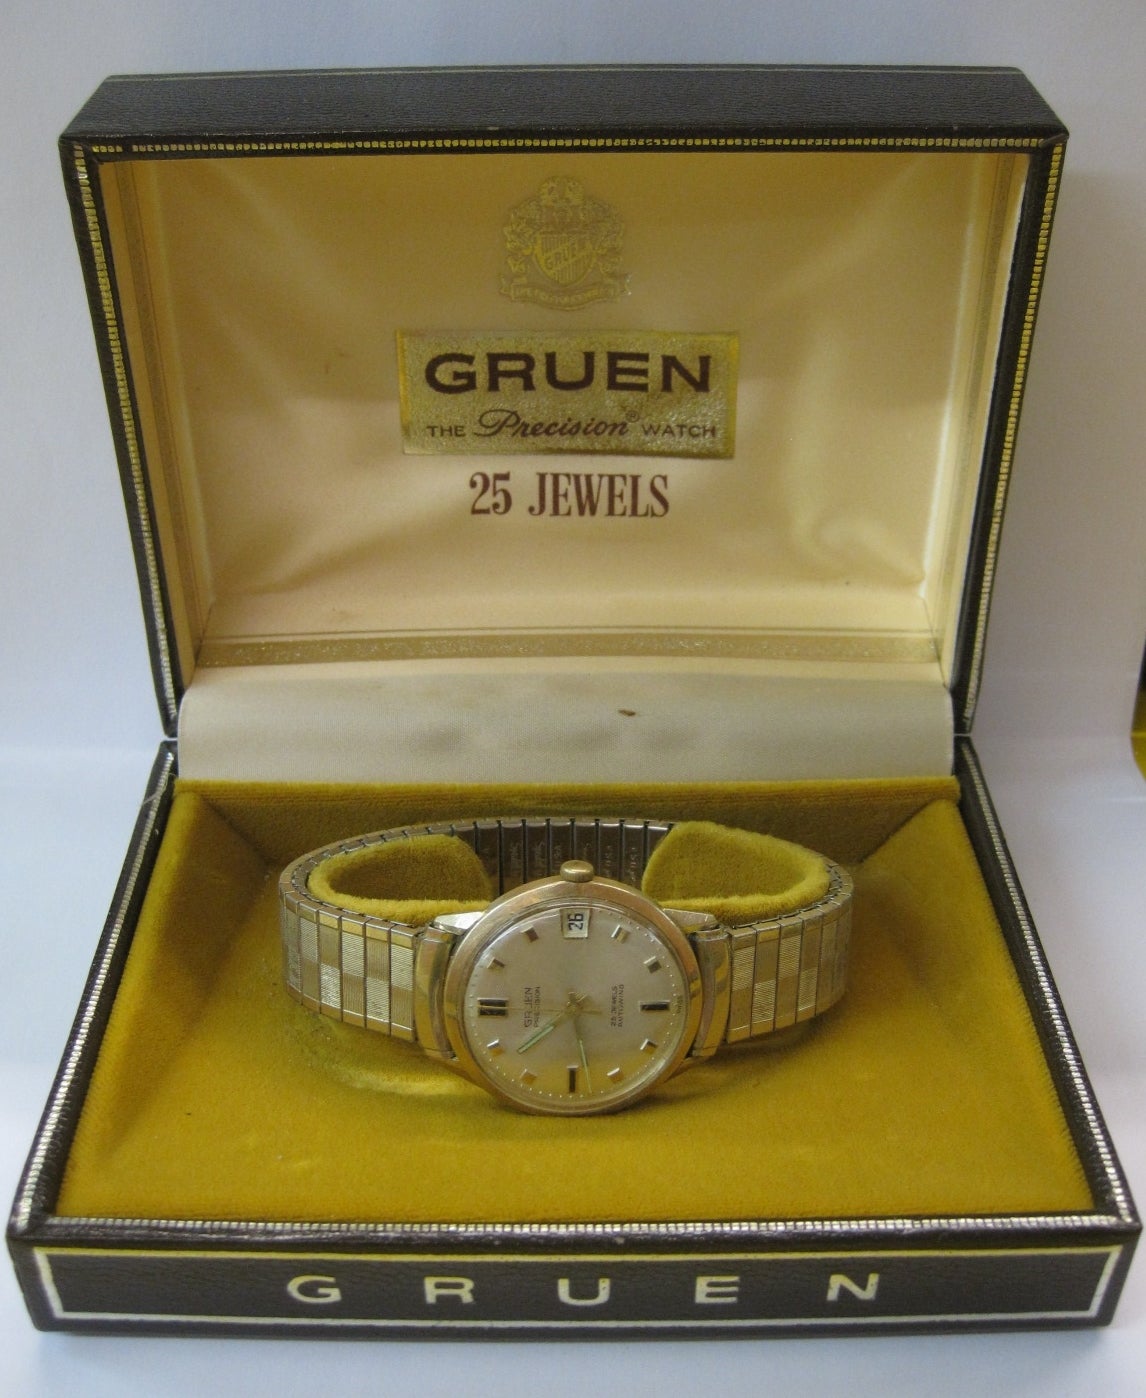 14k Gold Gruen Precision Watch
25 jewel working watch with original box.

Free shipping within the United States and Canada.